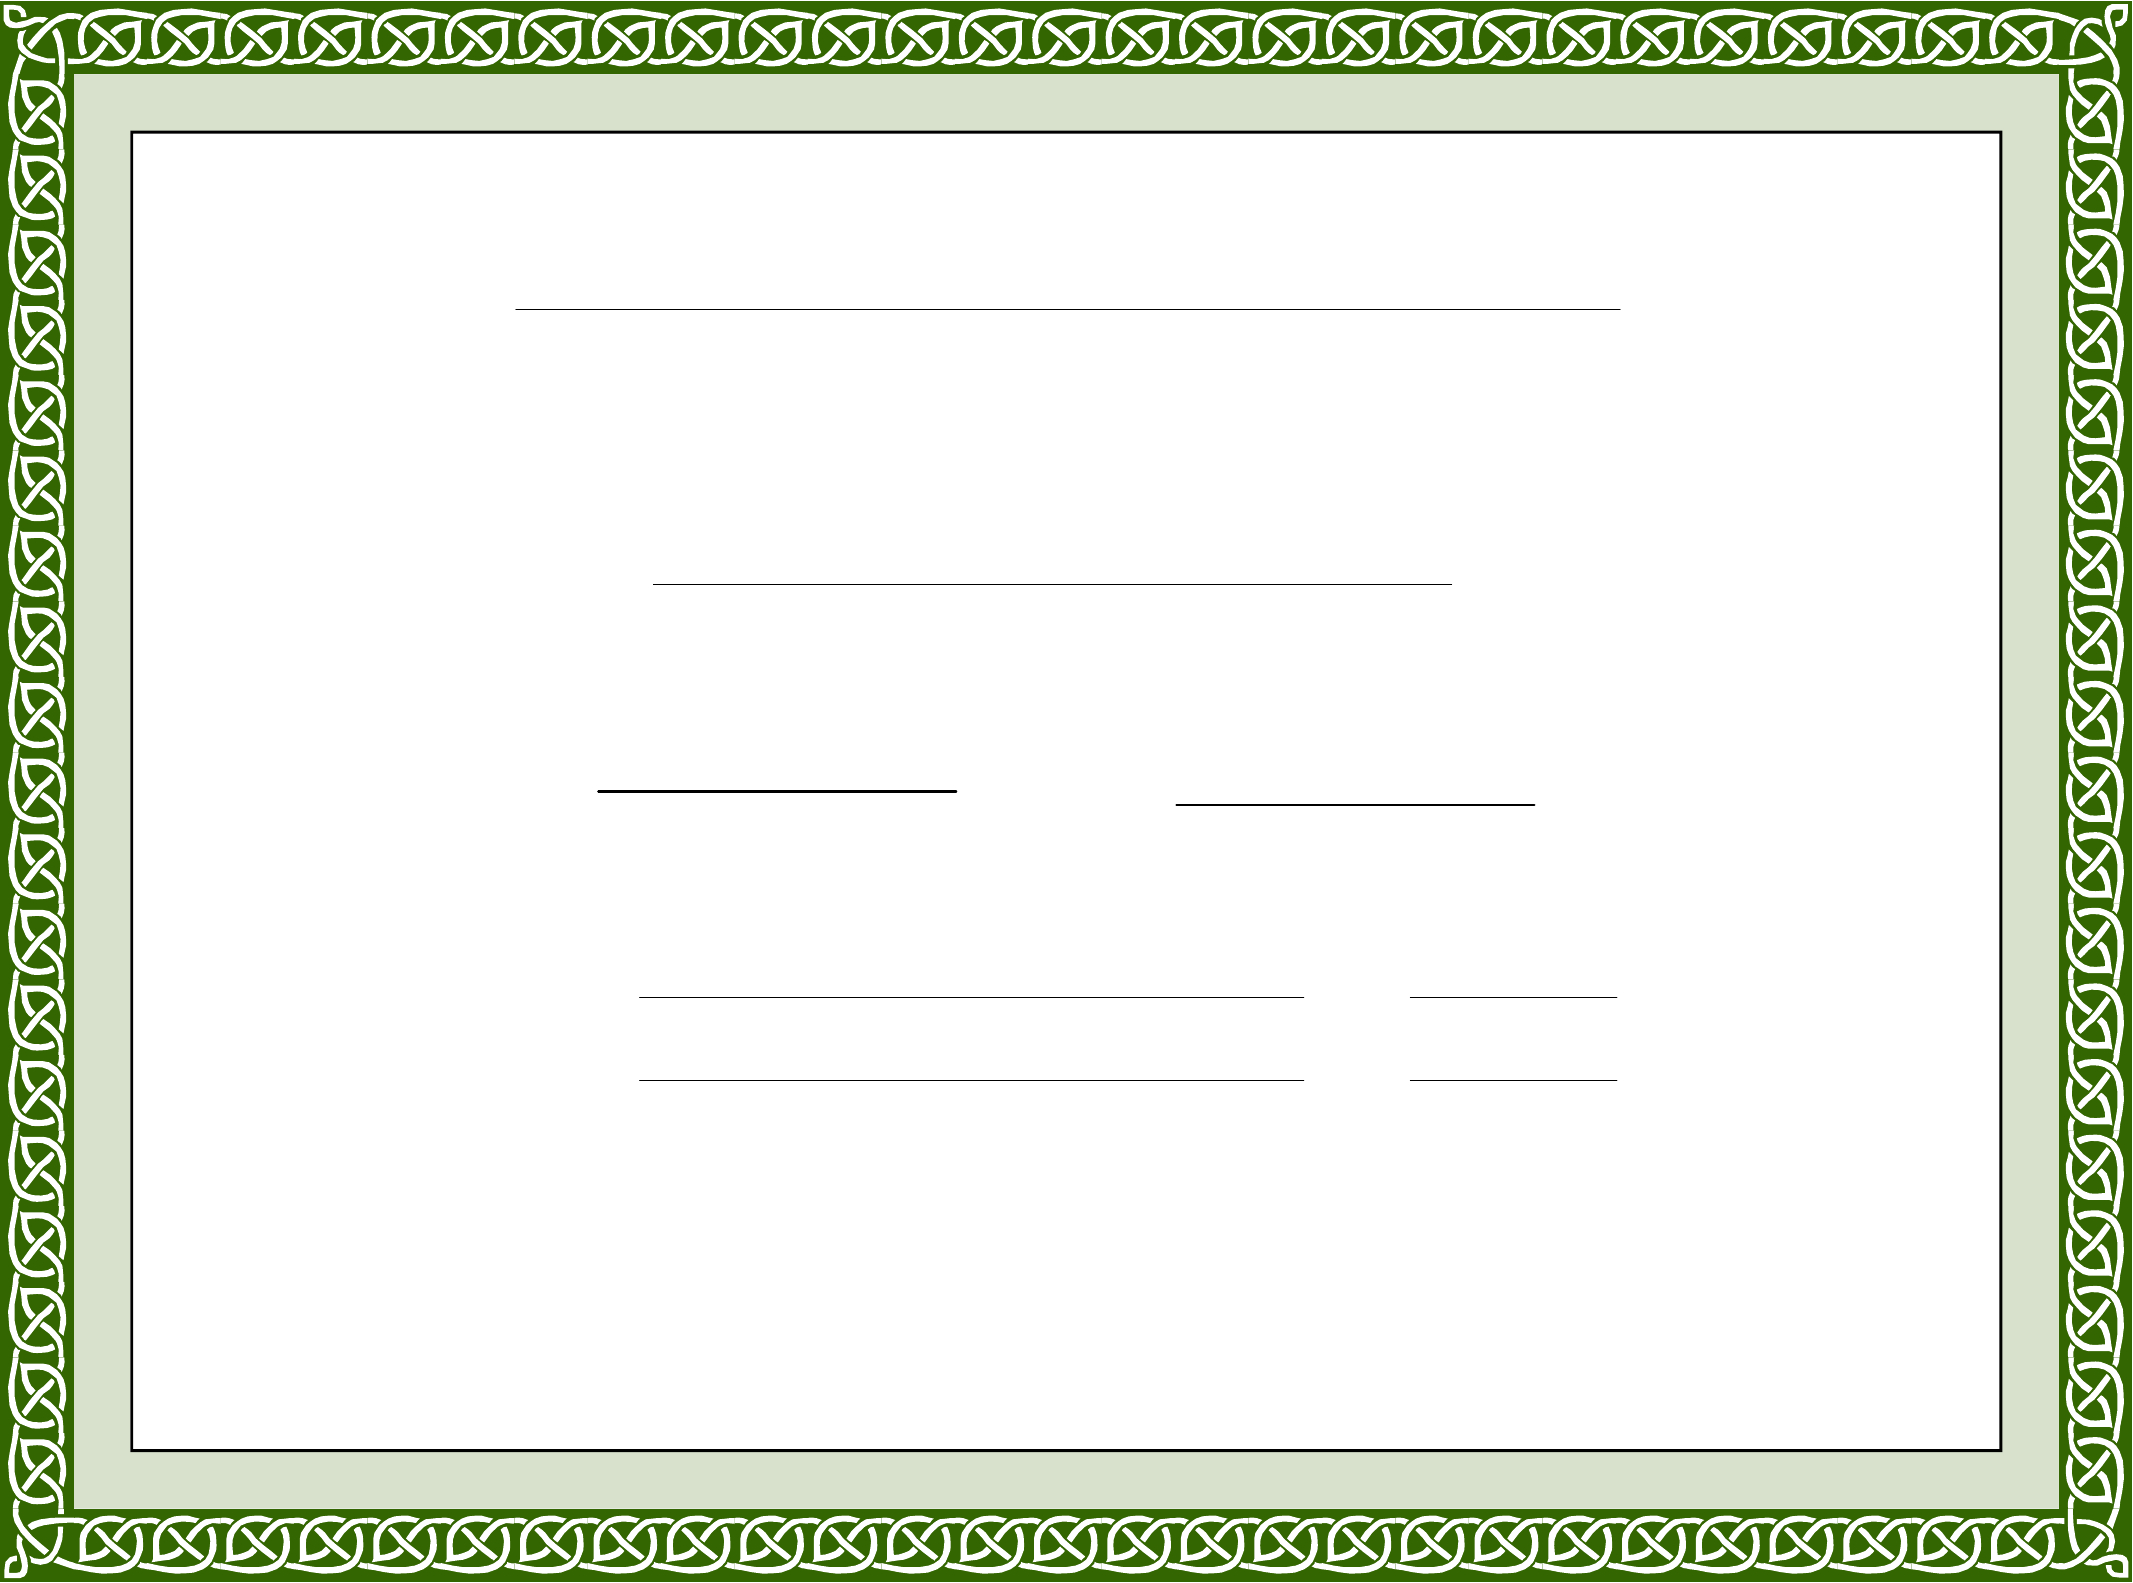 Sample Training Completion Certificate Template Free Download Regarding Free Training Completion Certificate Templates